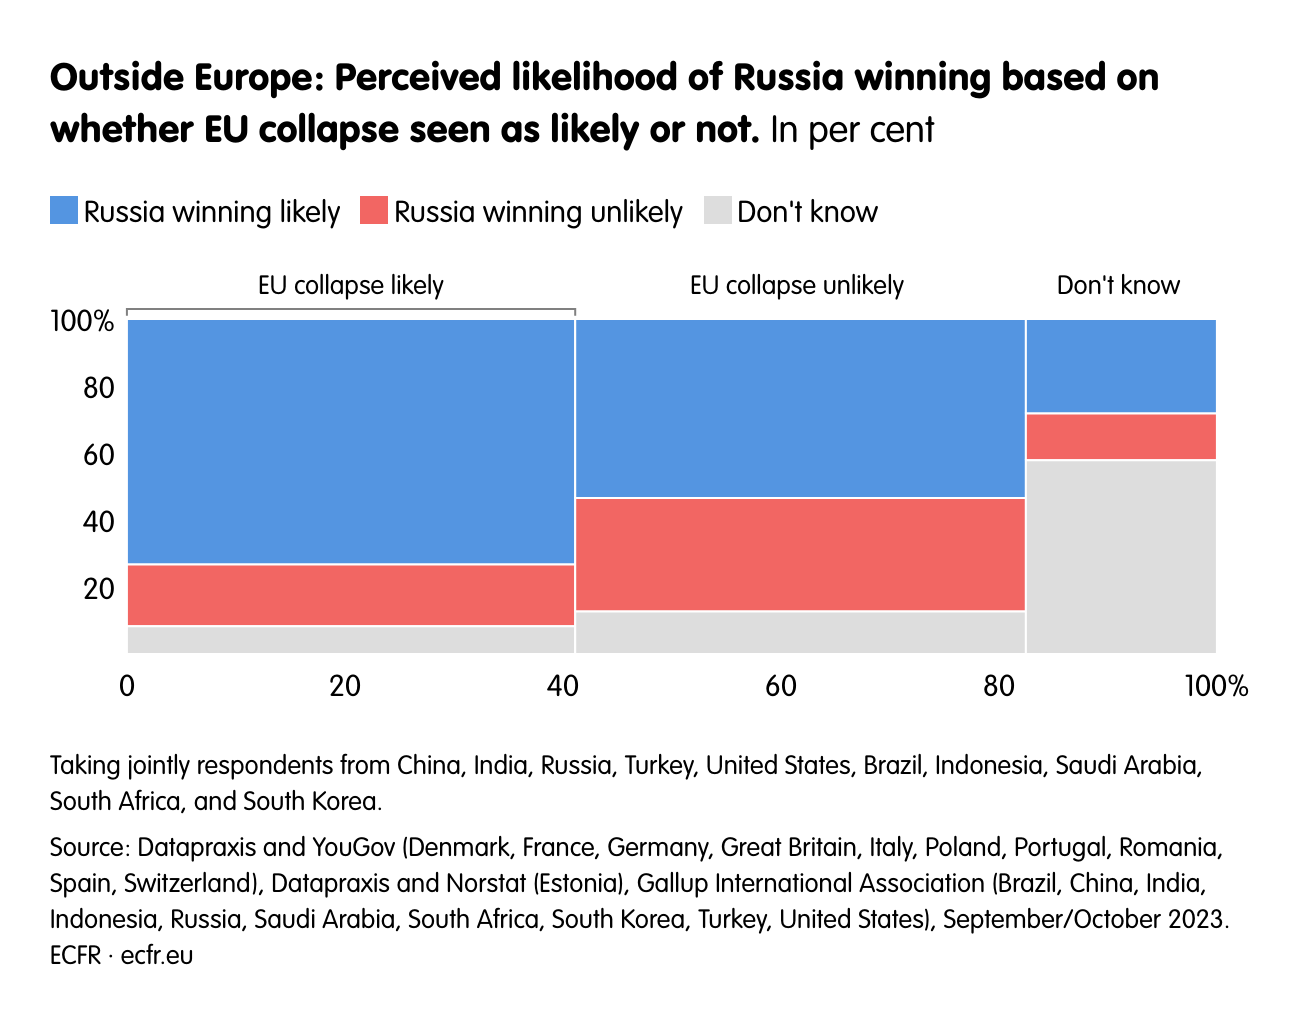 Outside Europe: Perceived likelihood of Russia winning based on whether EU collapse seen as likely or not.